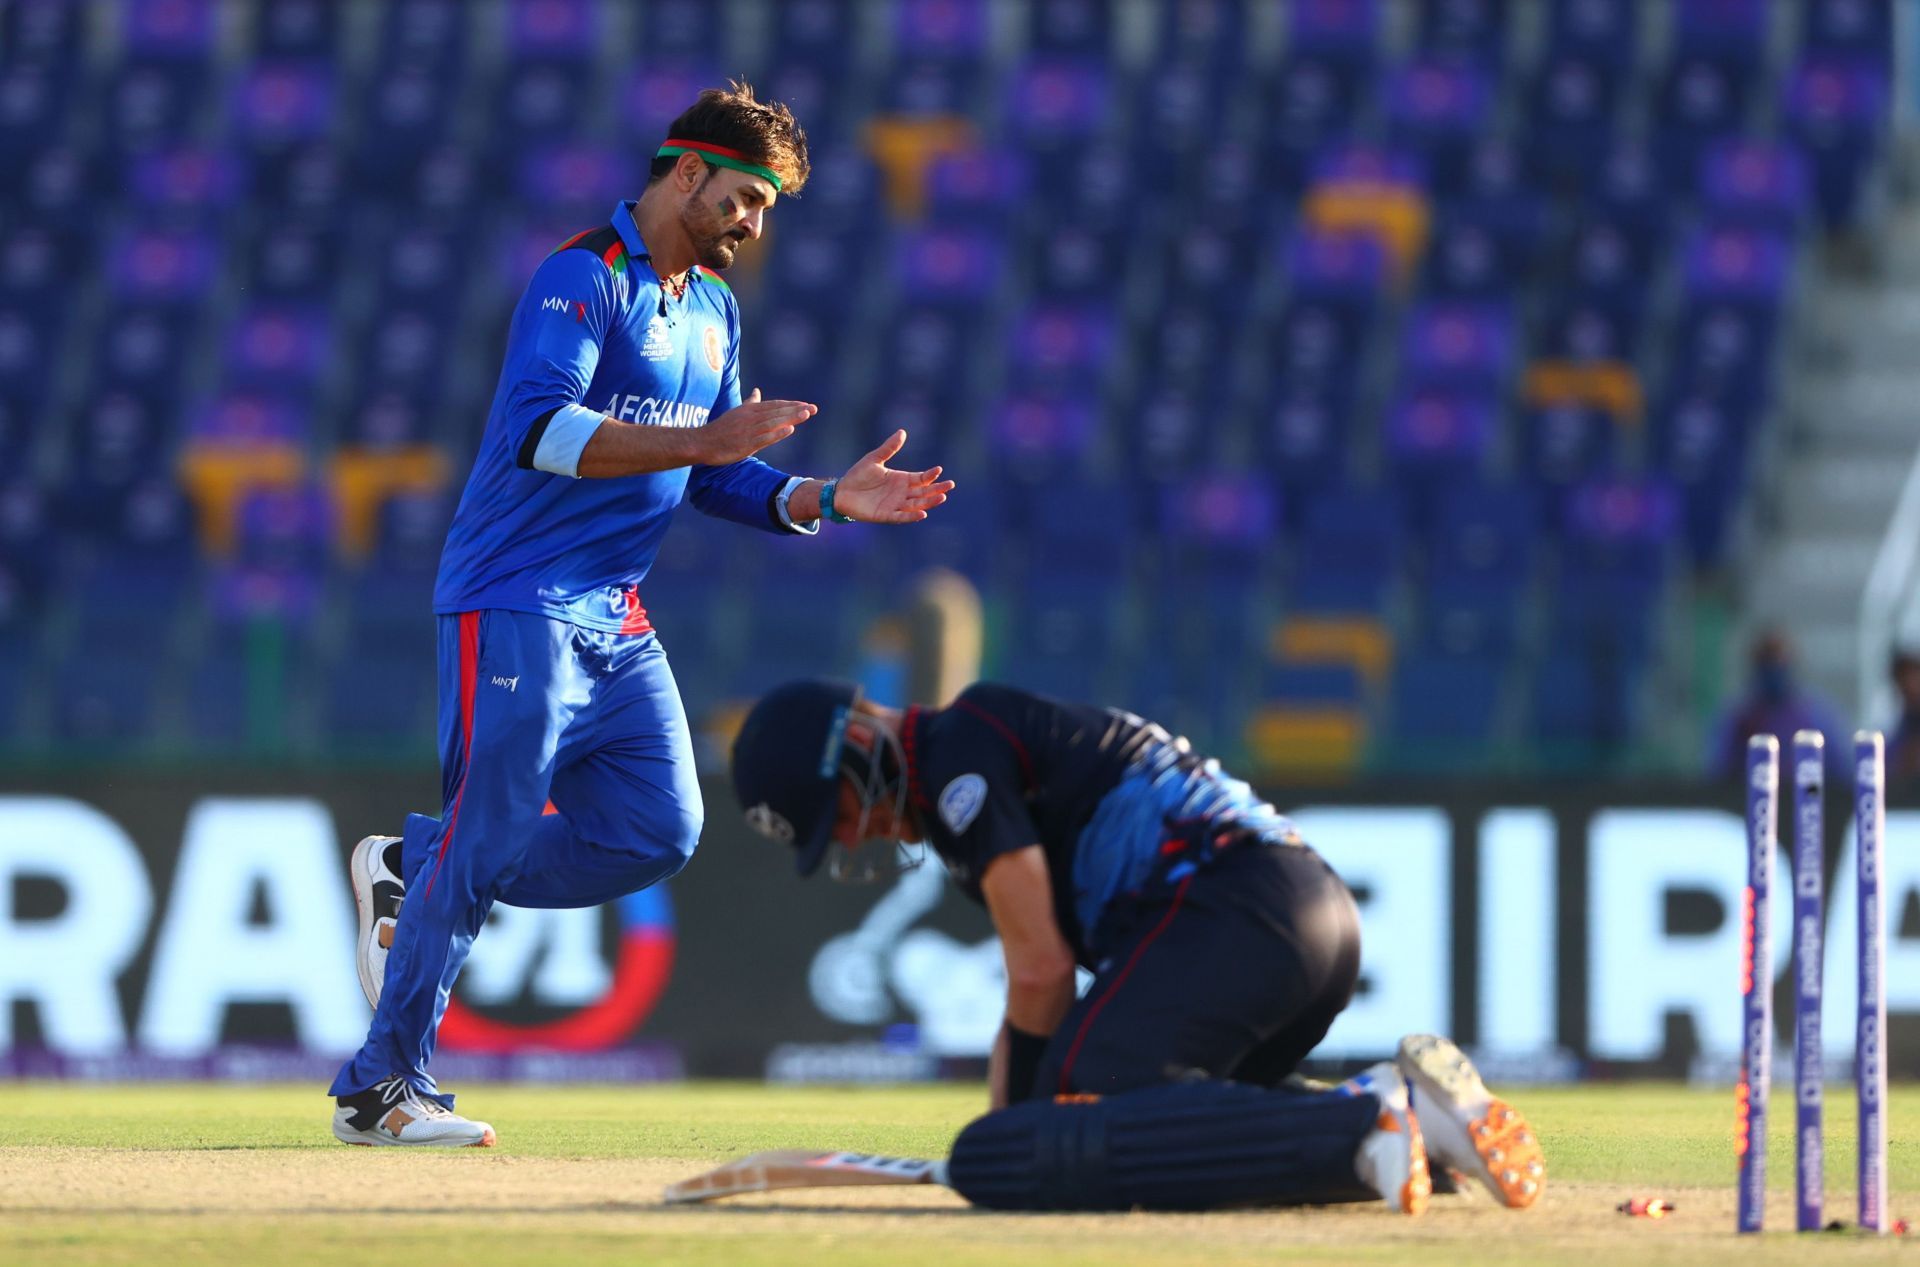 Hamid Hassan returned to the Afghanistan T20I team for the first time since 2016